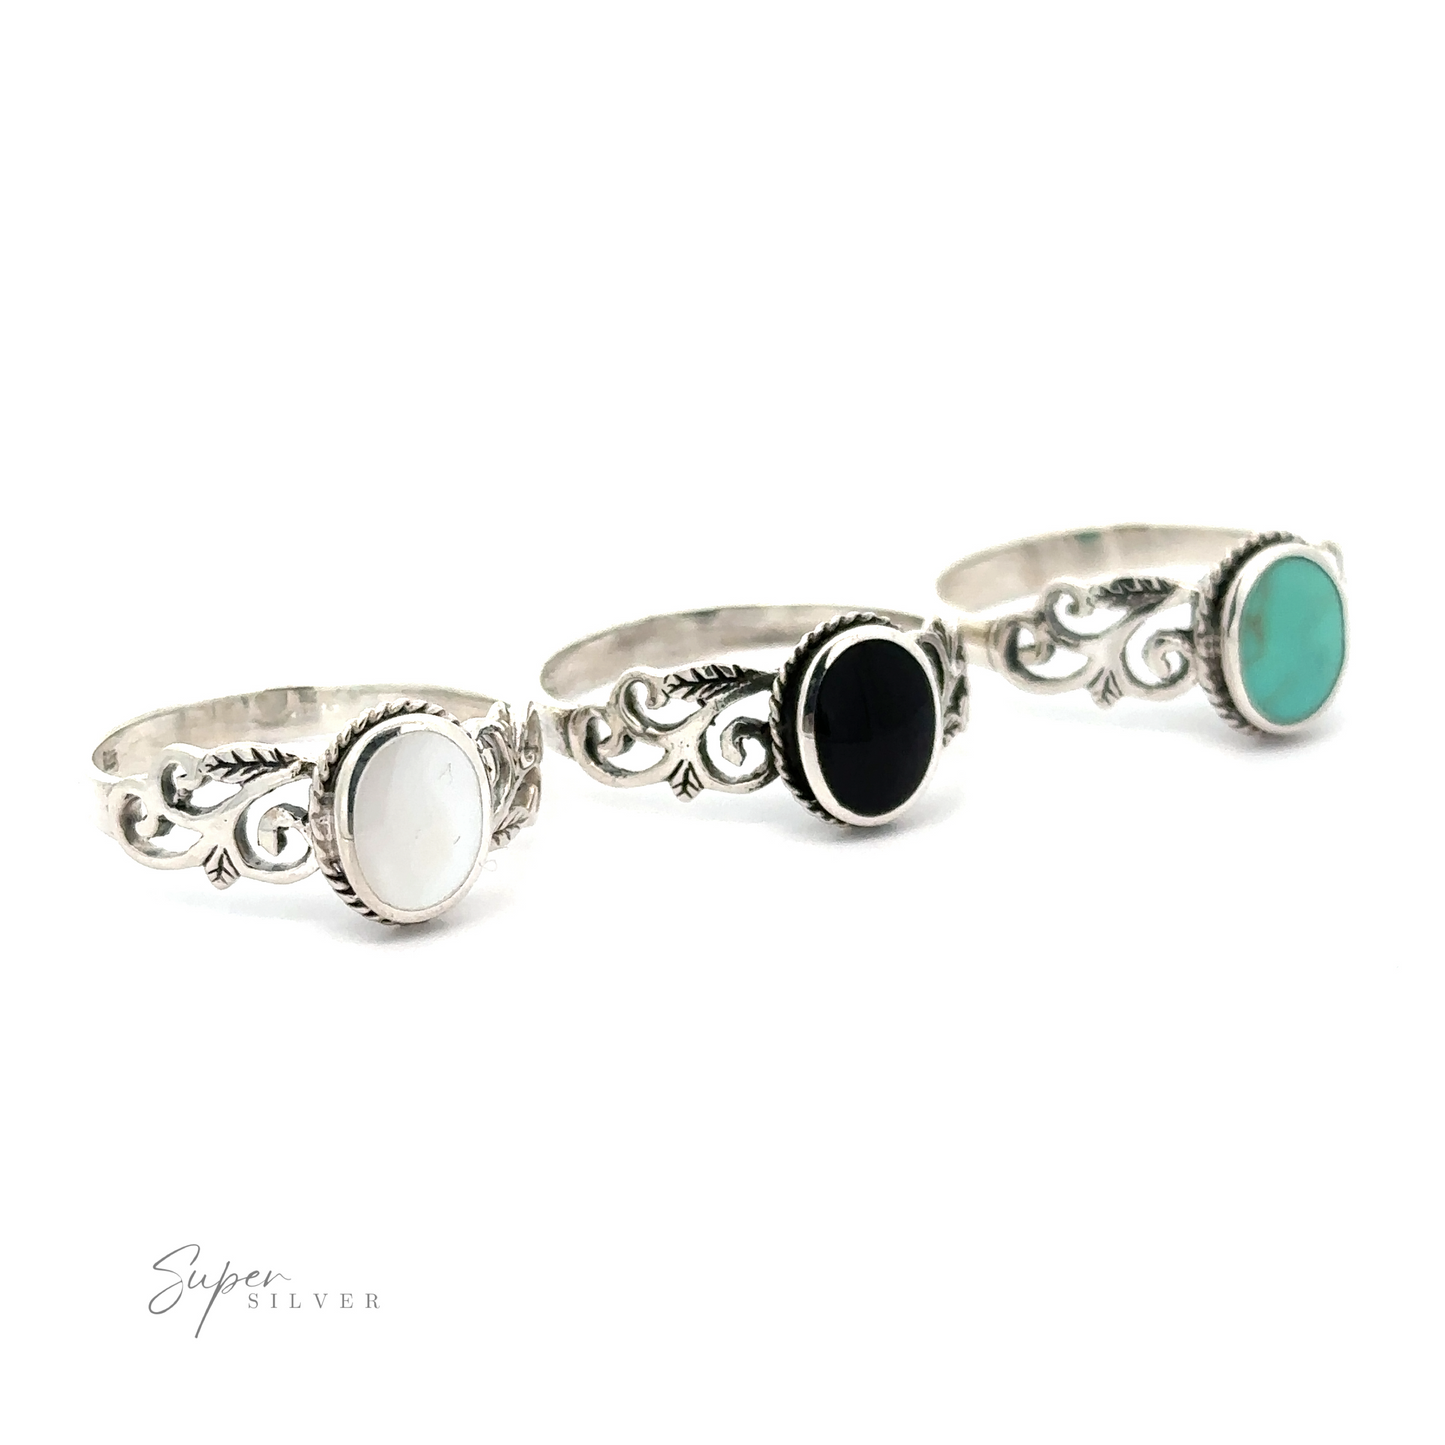 Three Oval Inlaid Rings with Swirls and Leaf Detailing featuring turquoise and black stones.